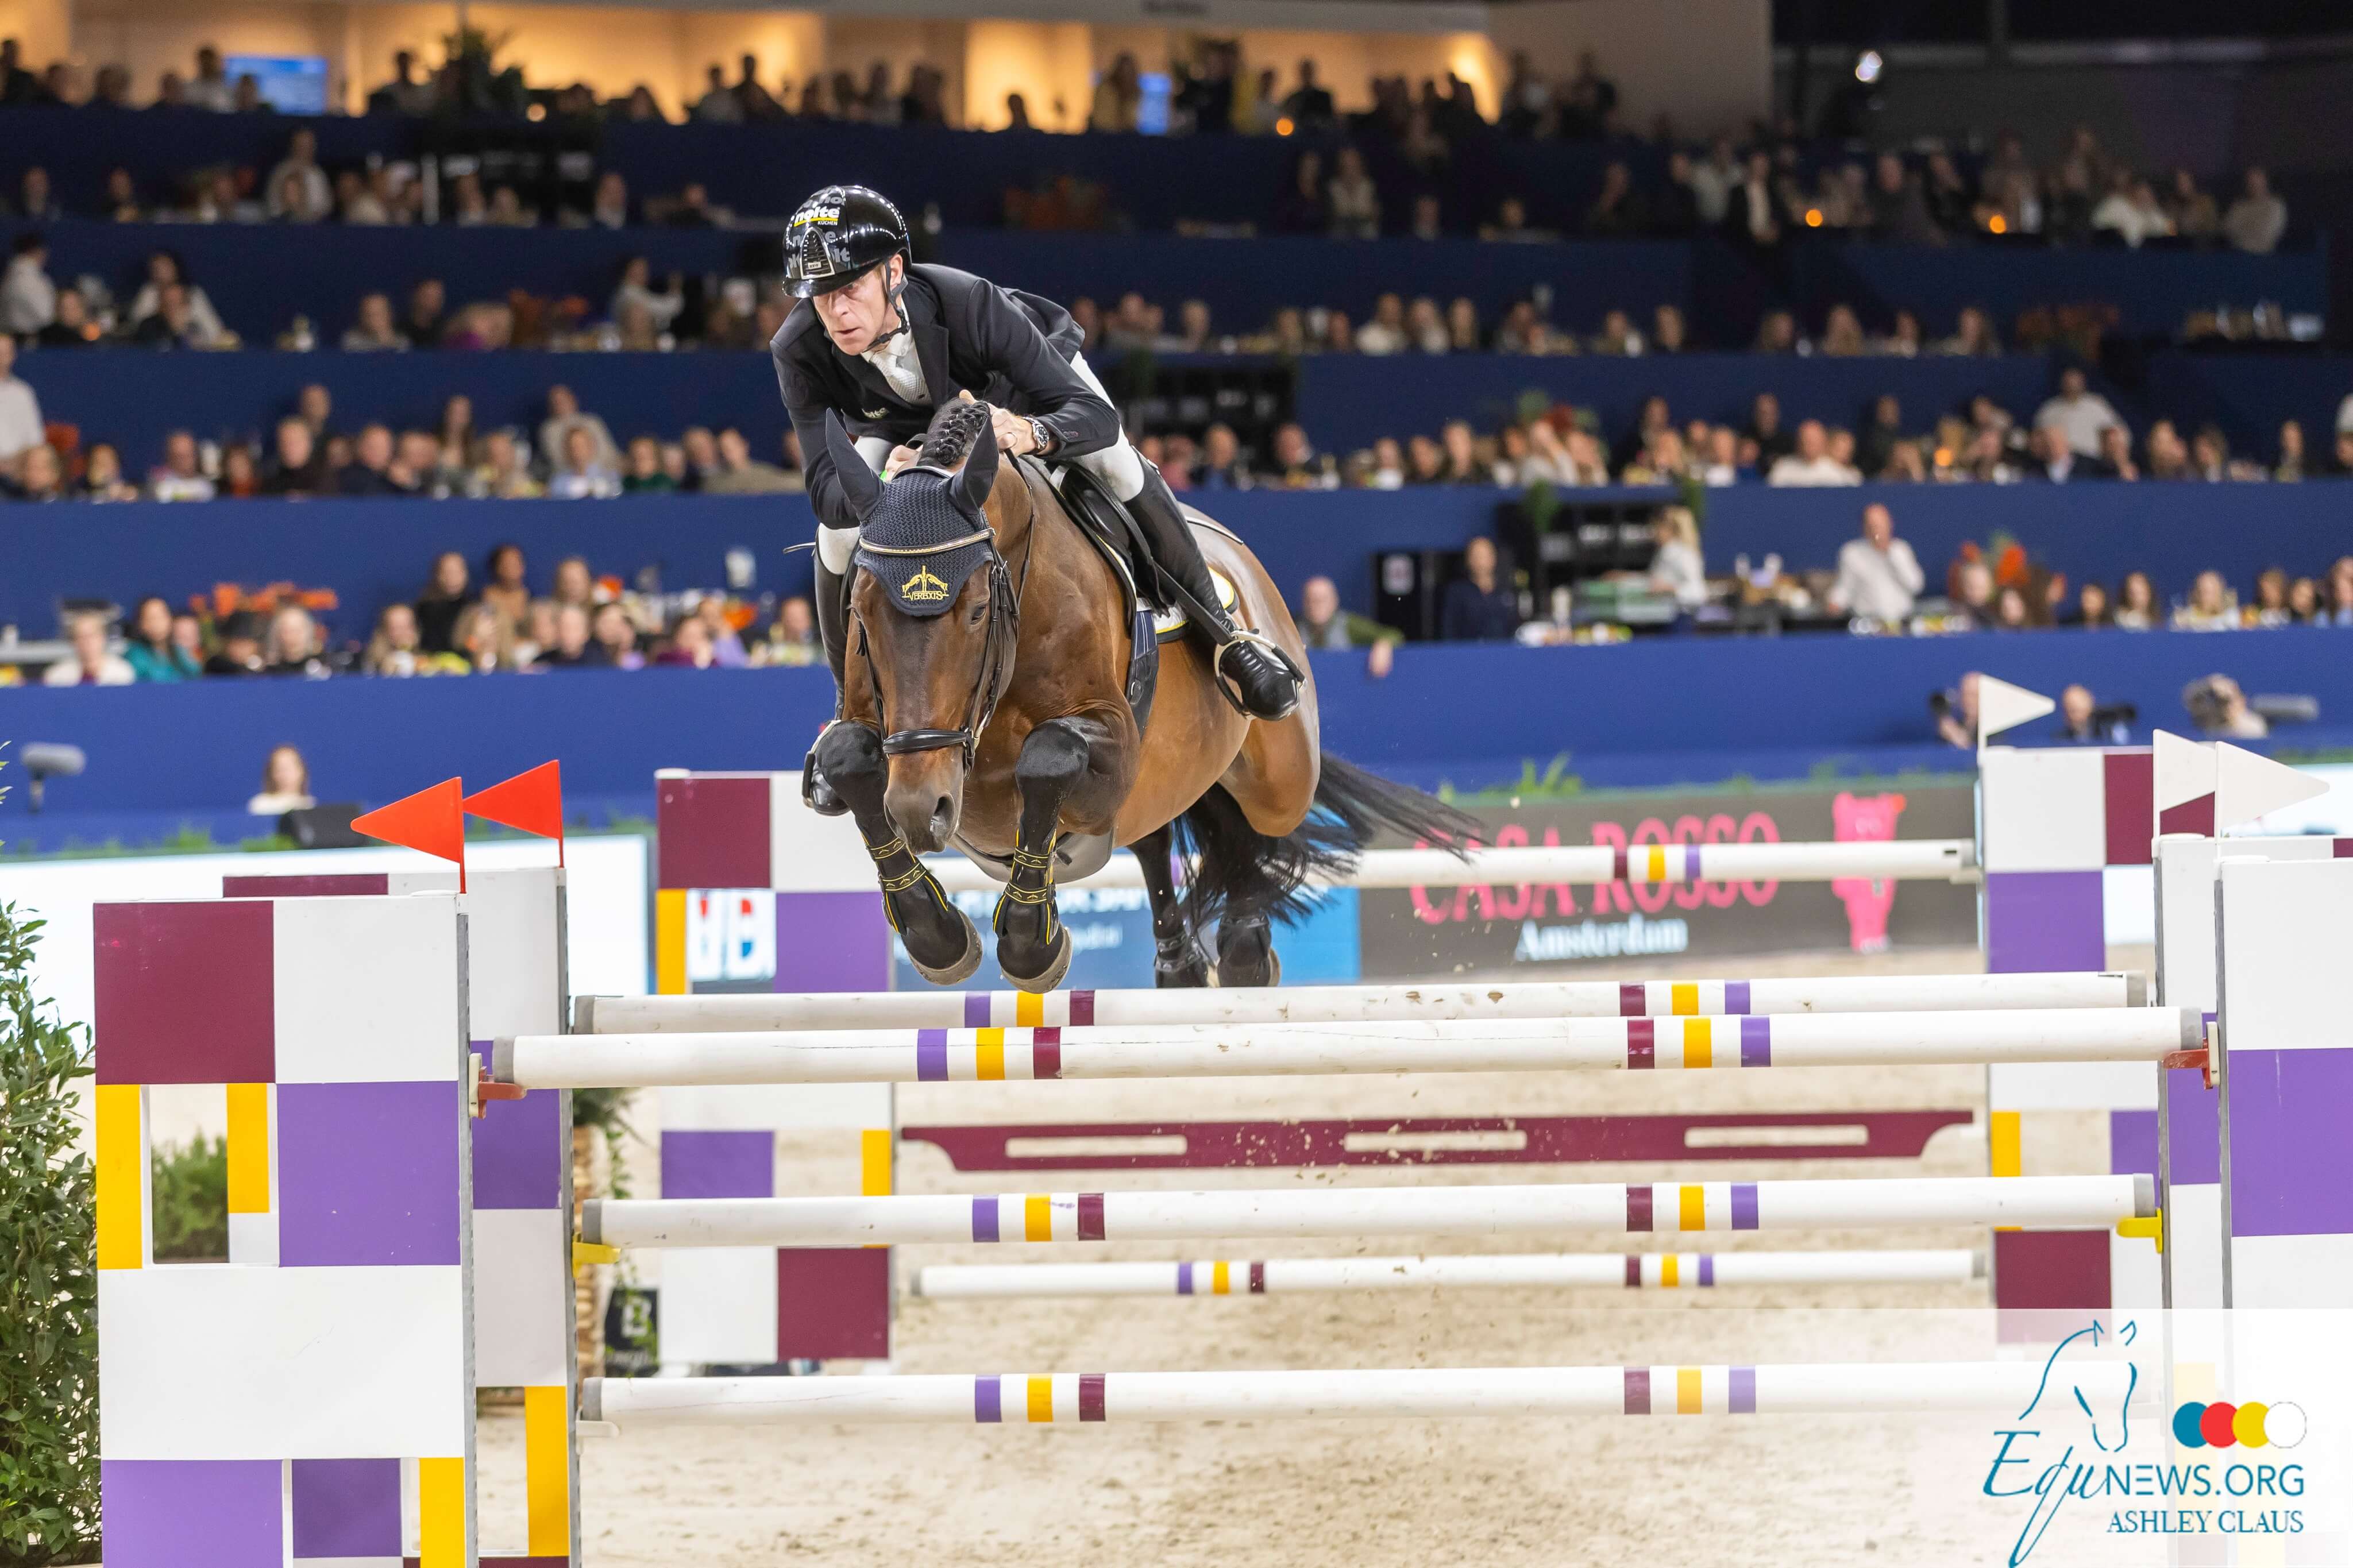 Ehning and Stargold charm the crowd in Amsterdam